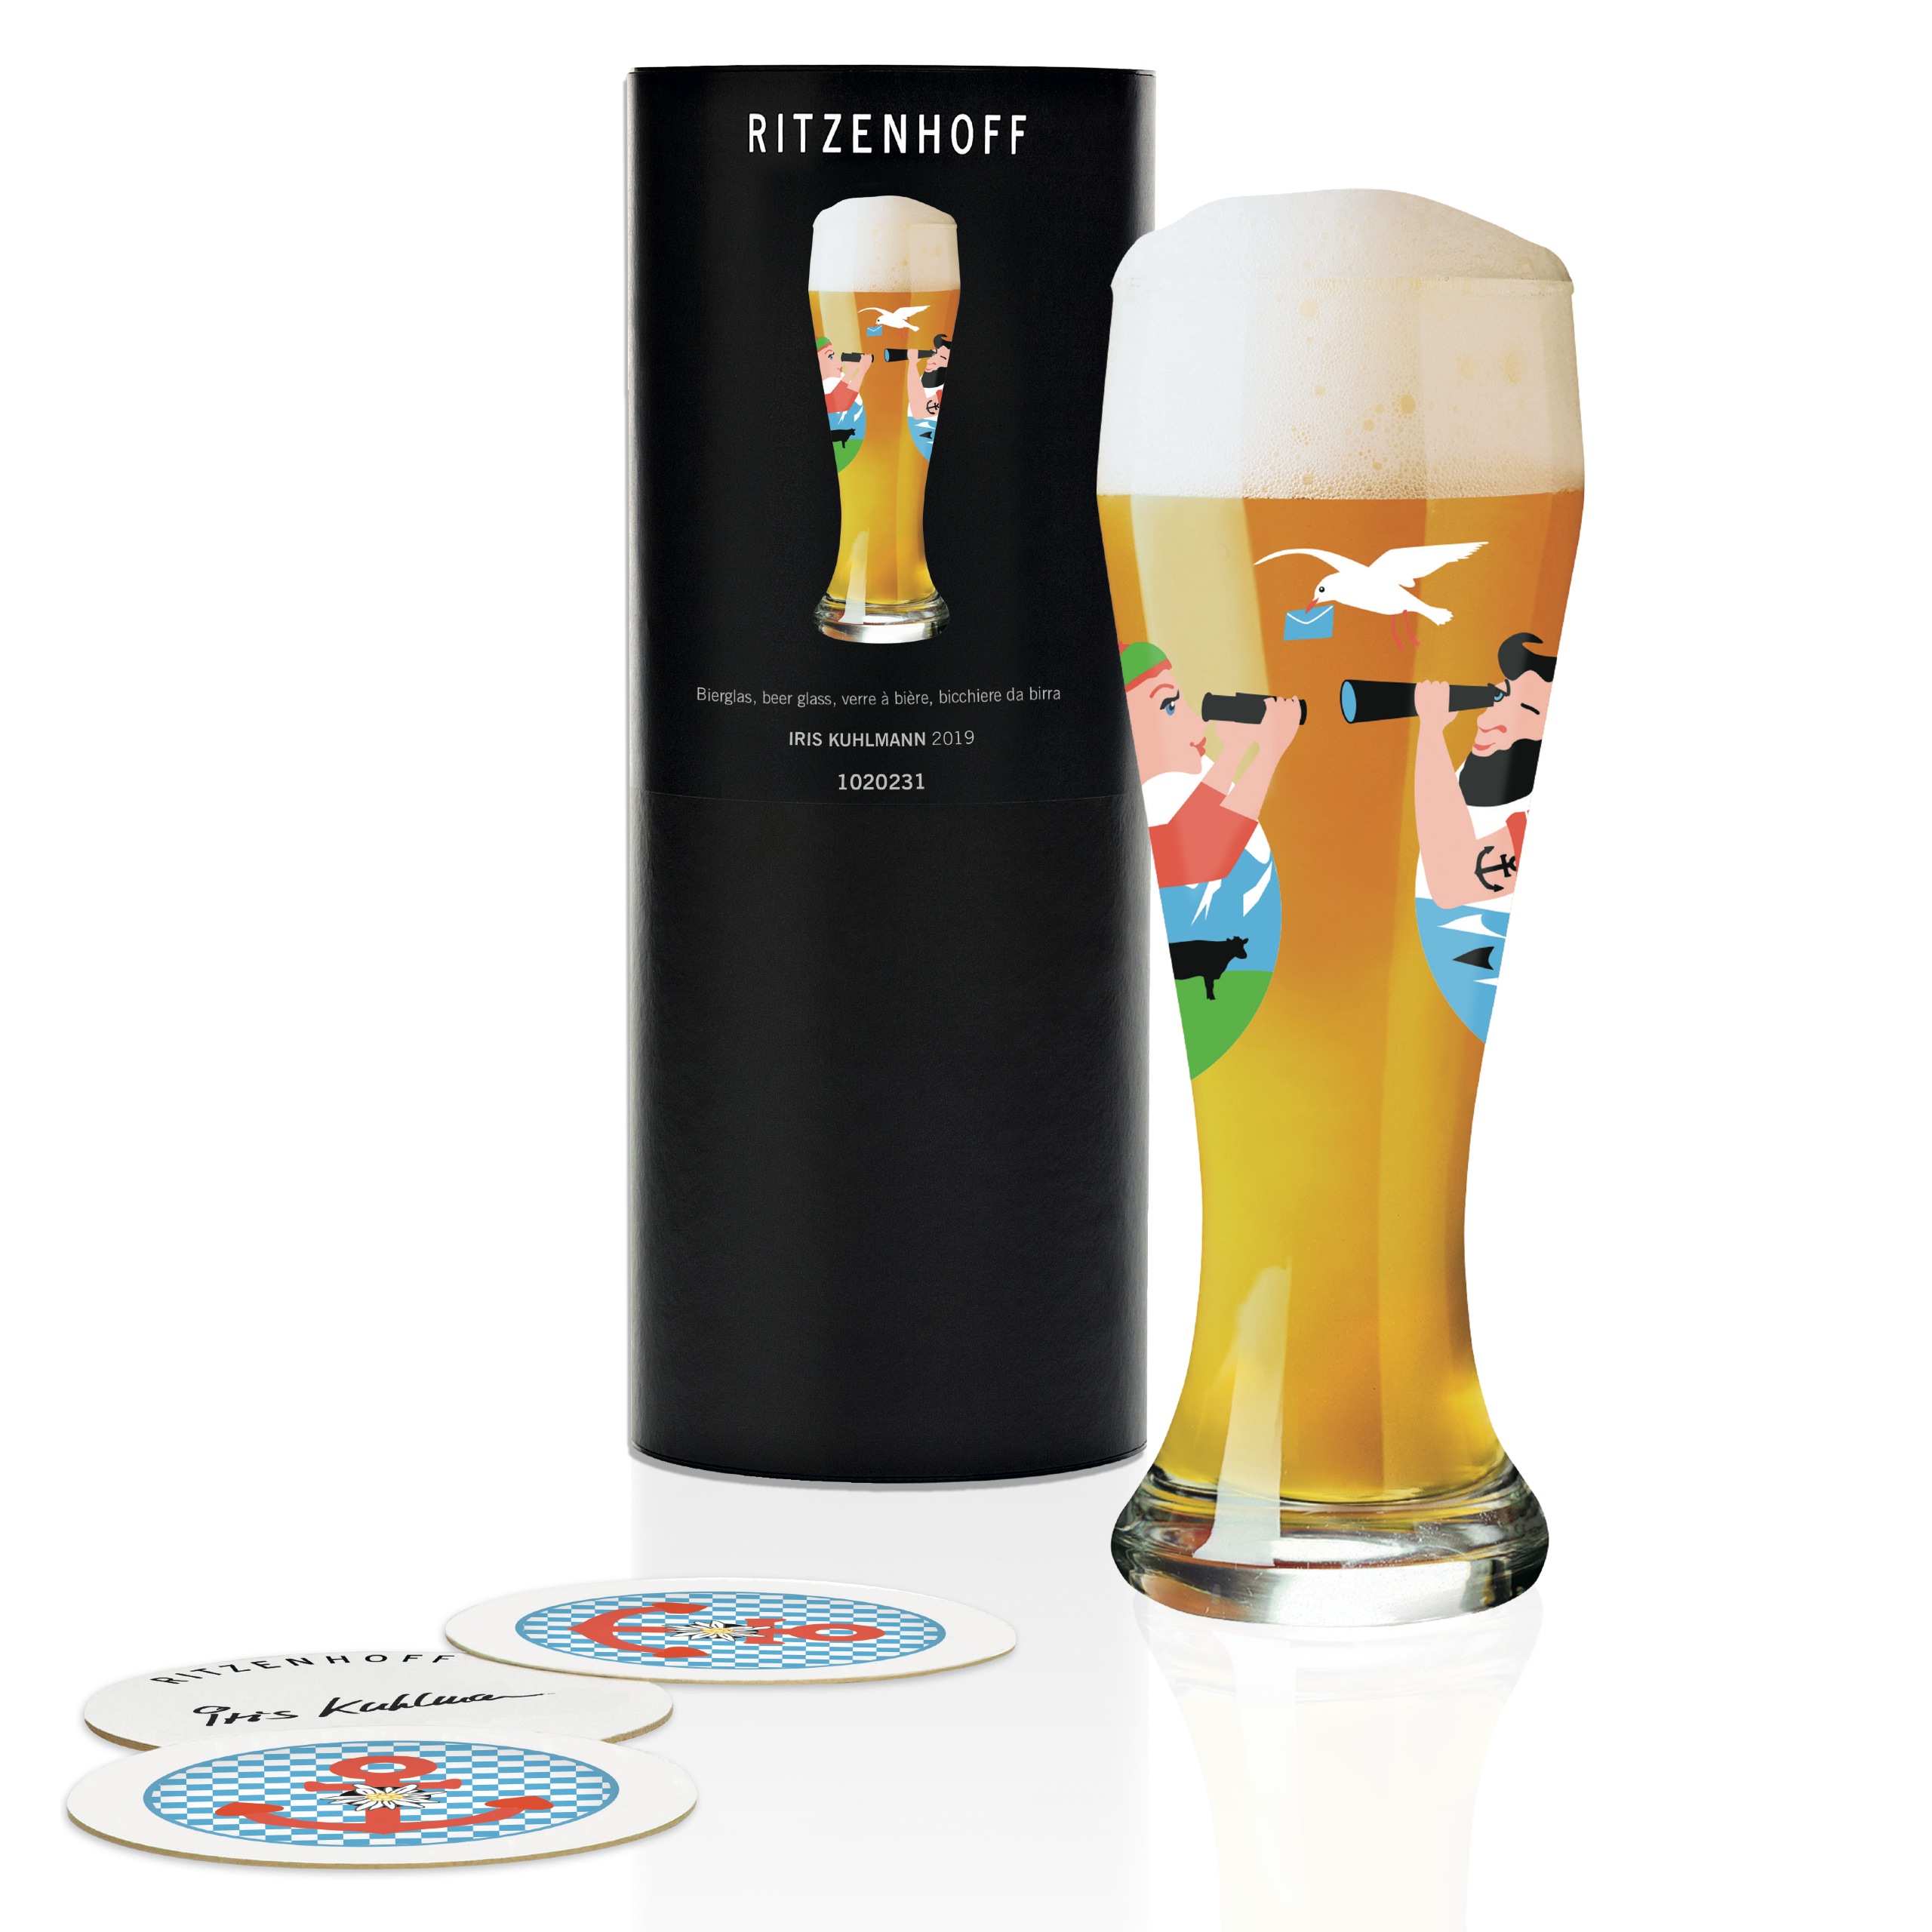 Ritzenhoff Wheat Beer beer by Direct I. – Kuhlmann glass 2019 Box Craft